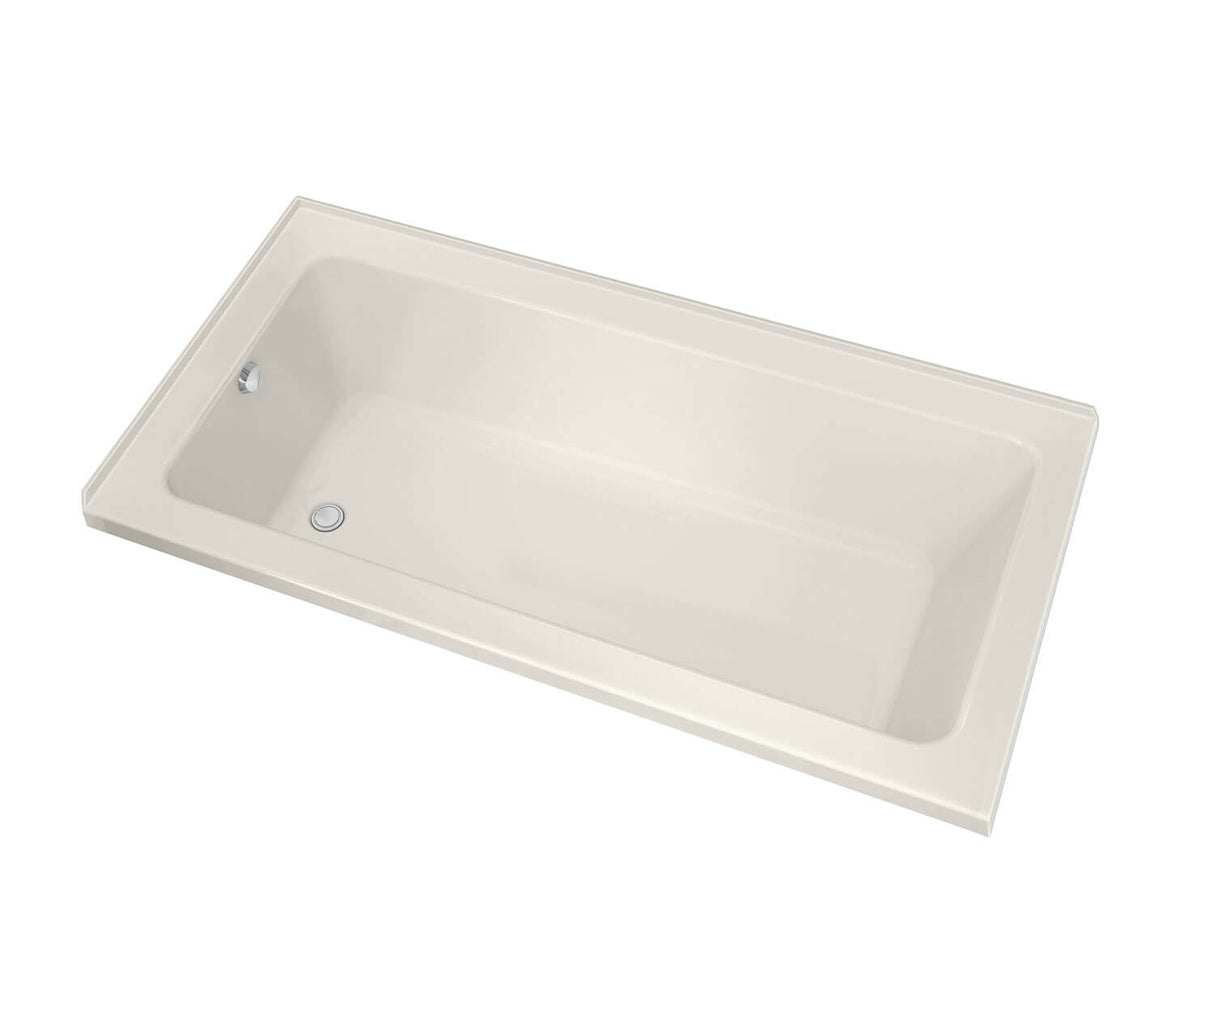 MAAX 106214-R-000-007 Pose 7242 IF Acrylic Corner Left Right-Hand Drain Bathtub in Biscuit